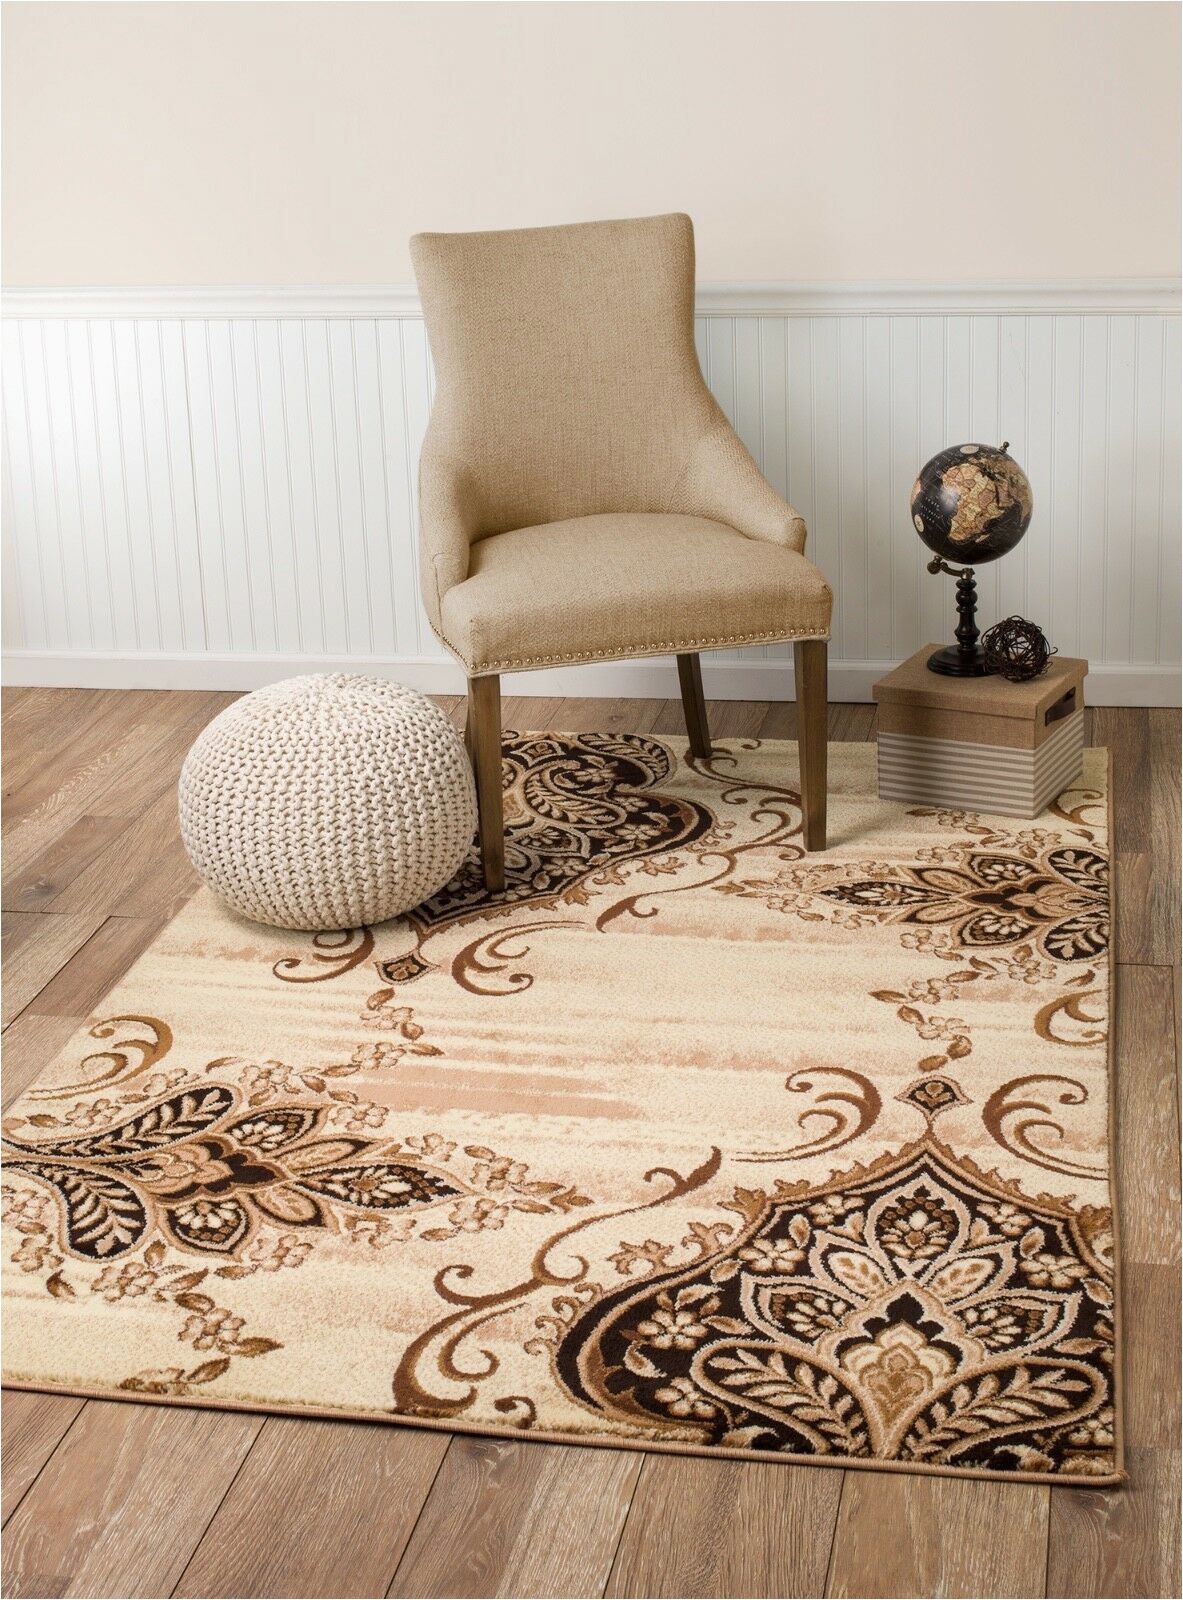 Better Homes and Gardens area Rug 5×7 area Rug Smt 31 Beige and Brown soft Pile Size Options 2×3 3×5 5×7 8×11